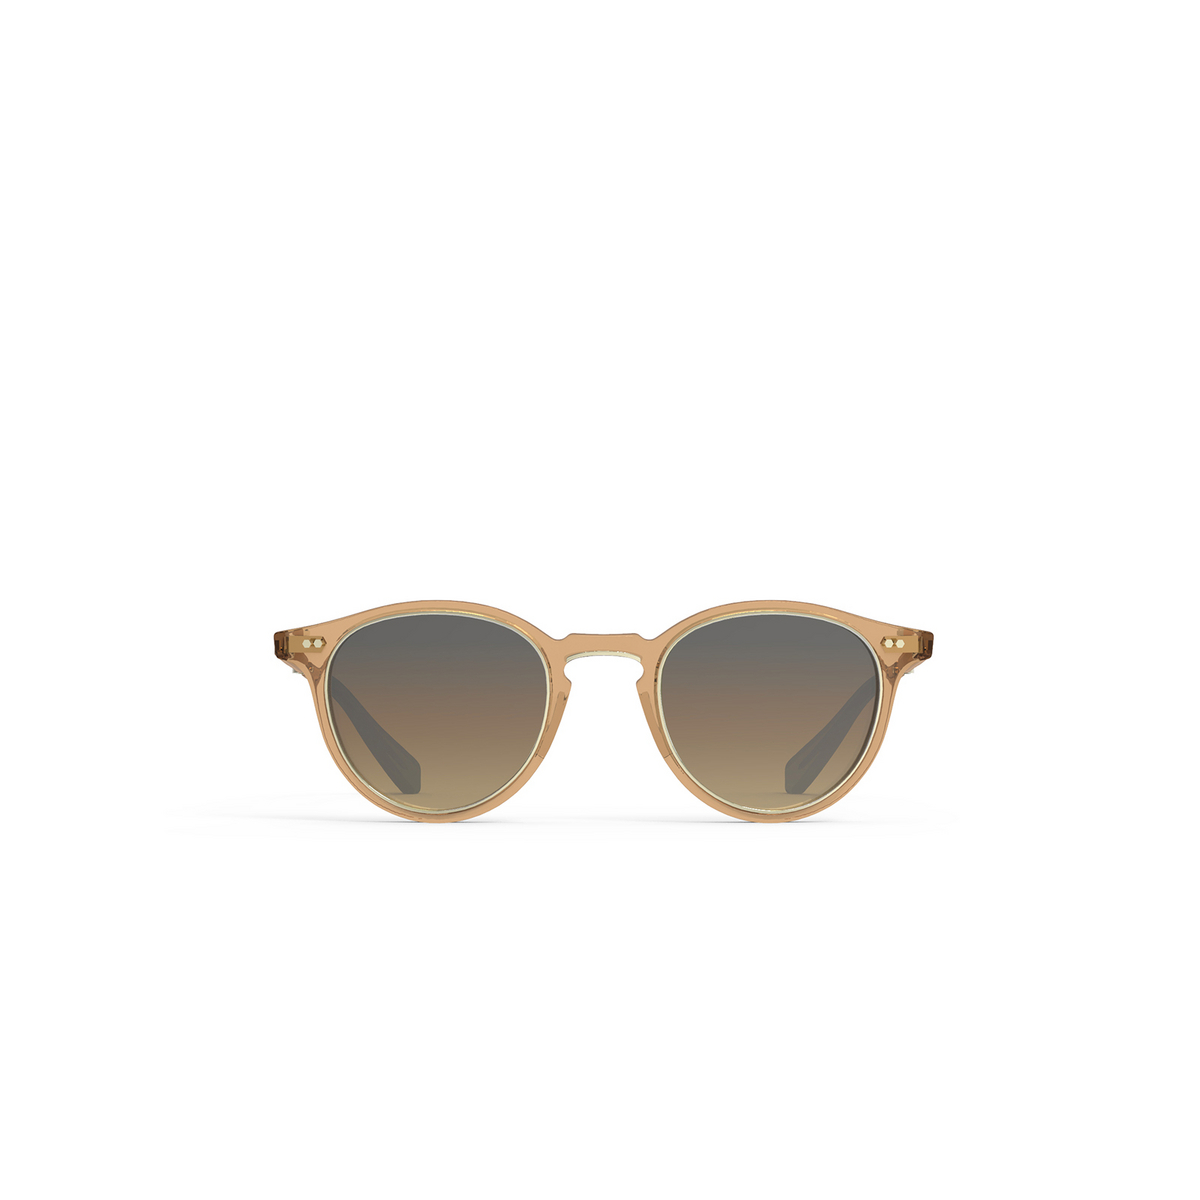 Mr. Leight® Round Sunglasses: Marmont Ii S color Topaz-12k White Gold/smokey TOP-12KG/SMKY - front view.